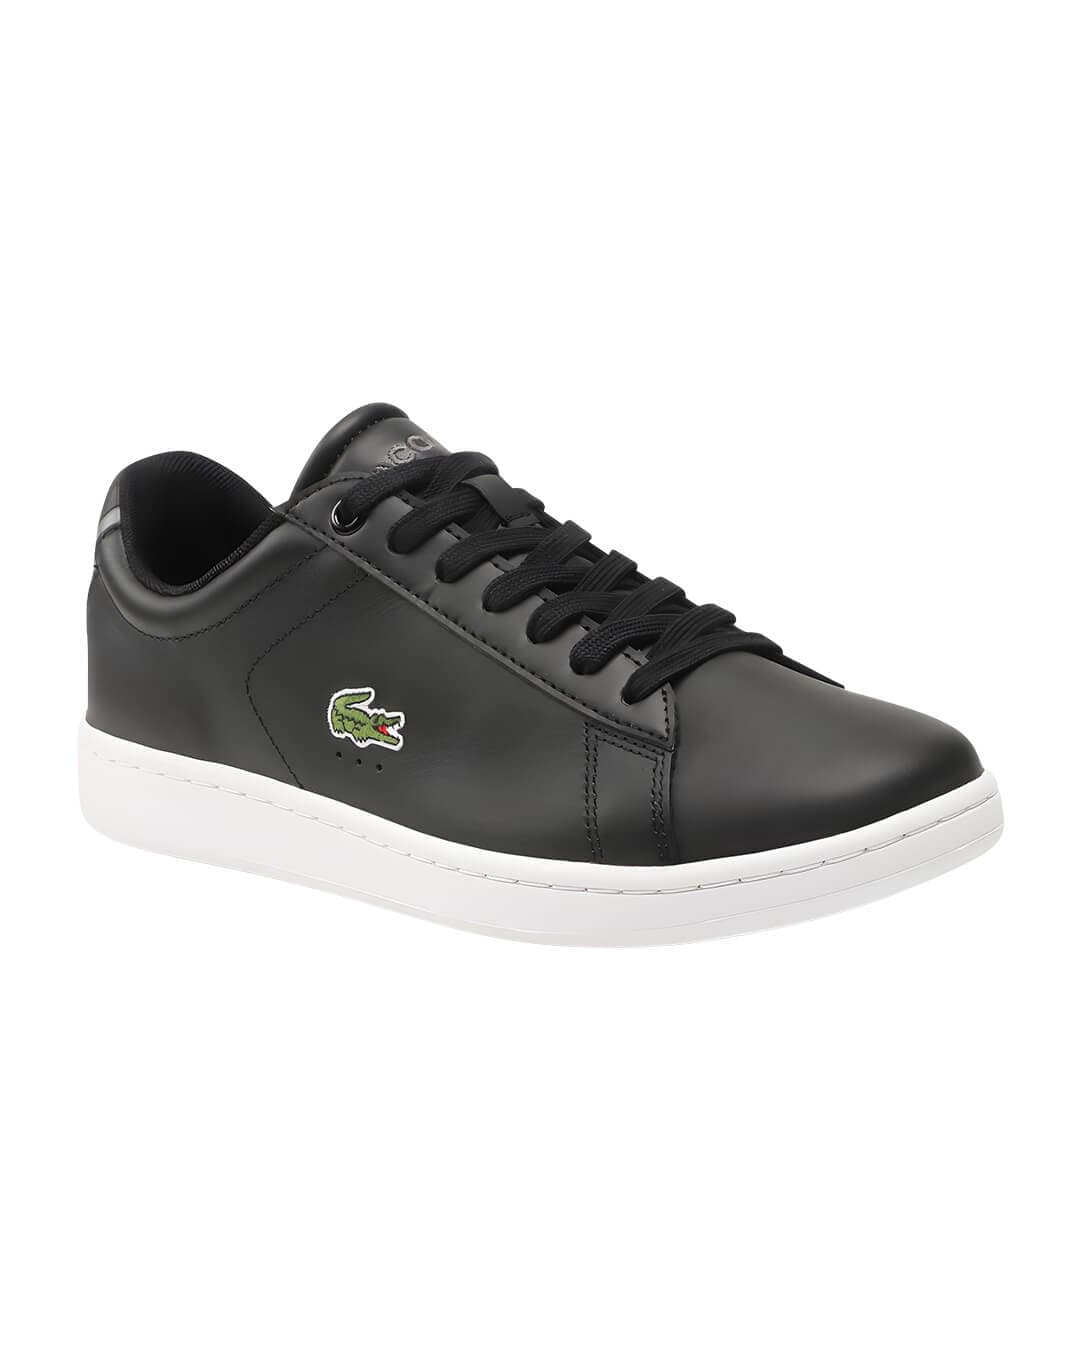 Lacoste Shoes Lacoste Carnaby Black Leather Sneakers